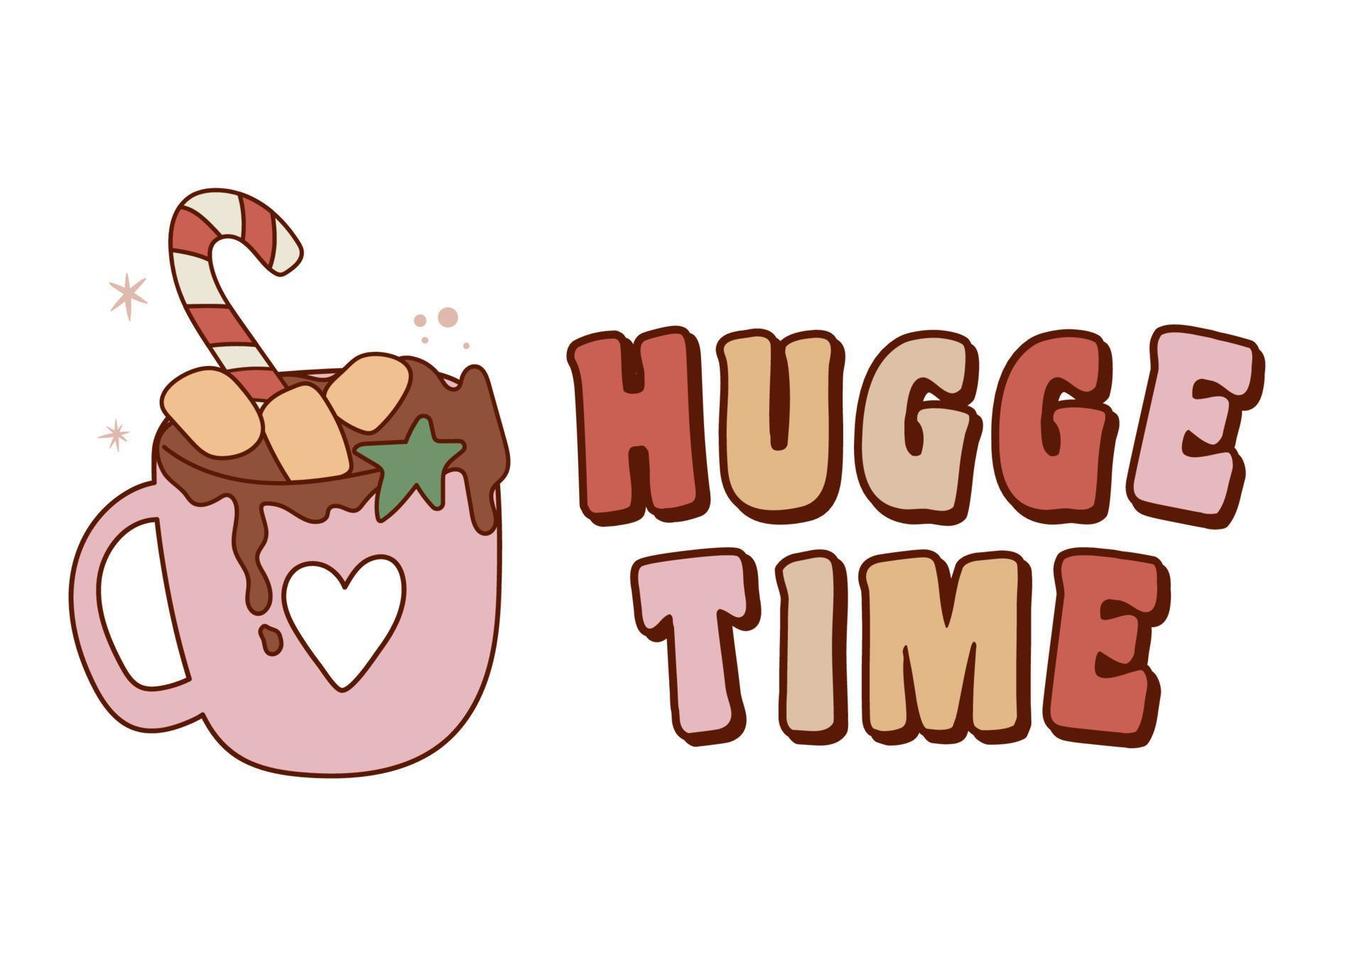 Huge time quote with hot cocoa in retro style. 70s 60s nostalgic poster or card. vector